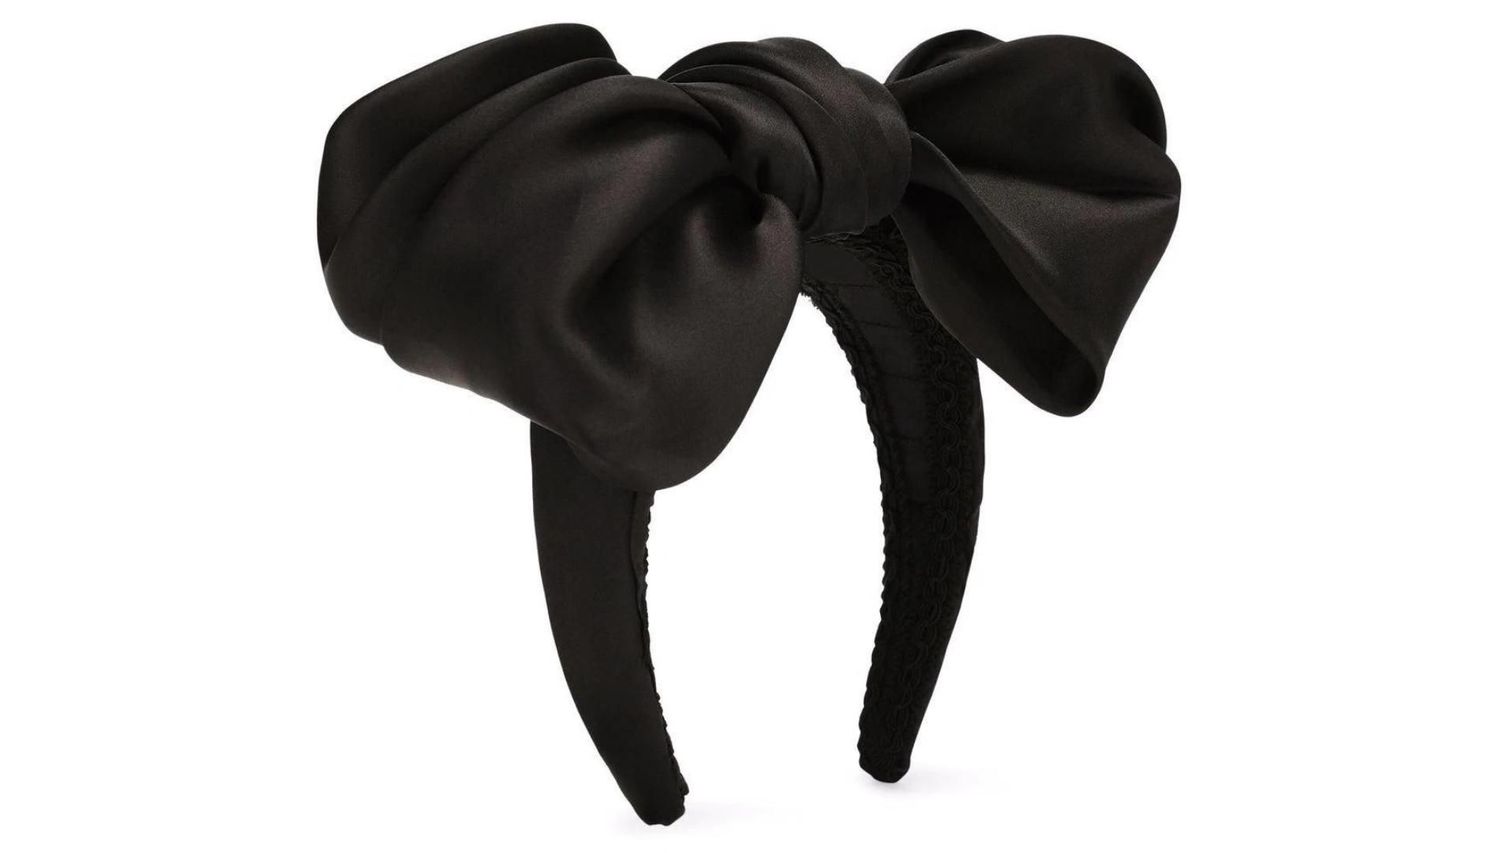 Hair Bows Are The Accessory Of The Moment, According To Chanel